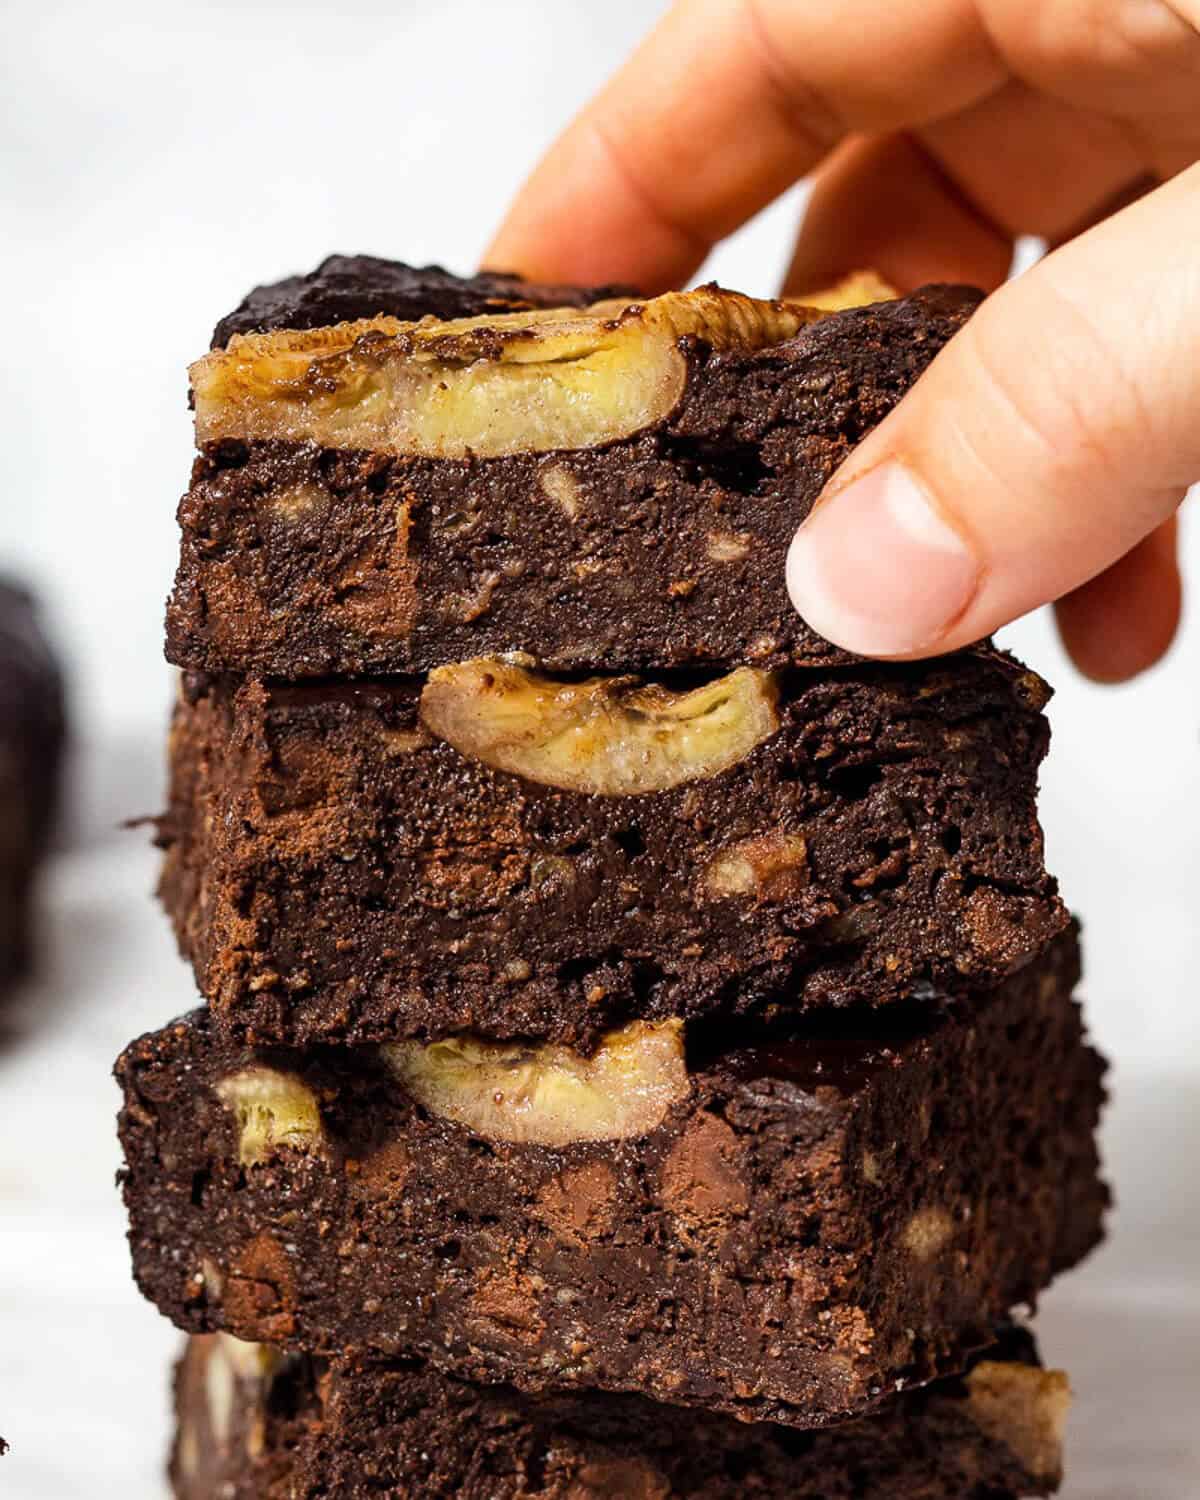 Four fudgy banana brownies with chocolate chips are stacked on top of each other, a hand is holding the brownie on top.